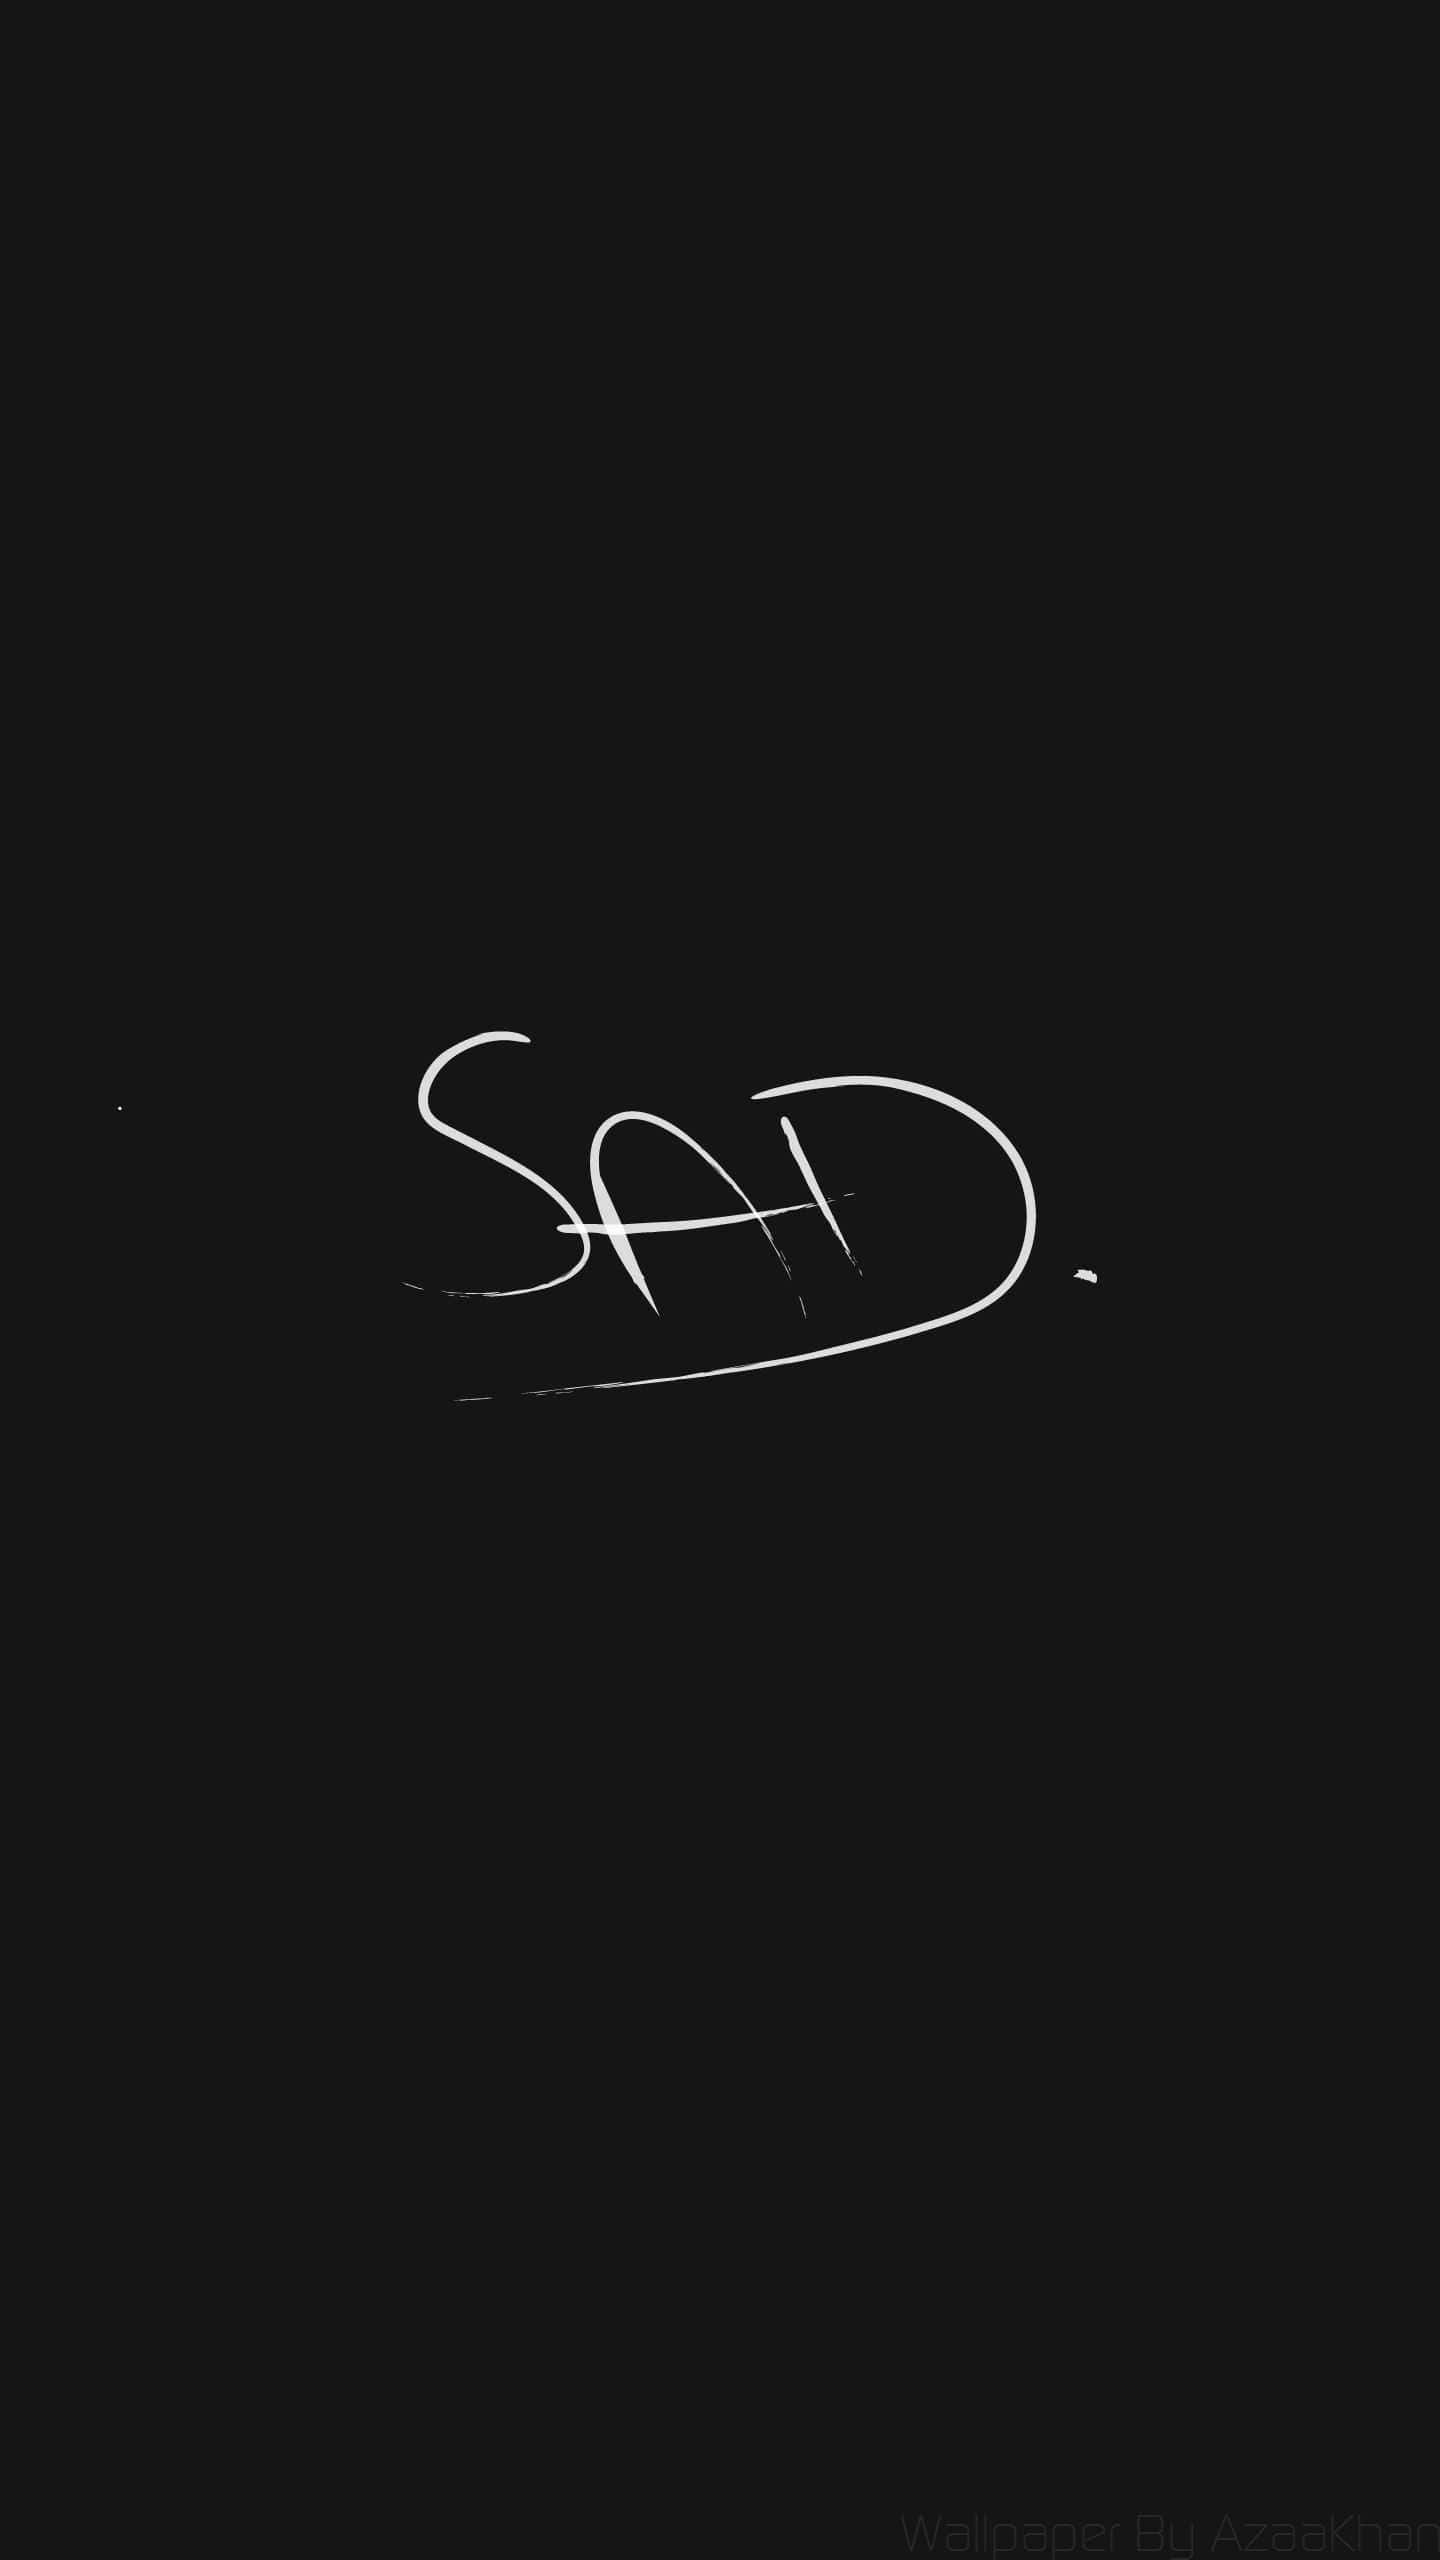 Download Don't be sad, upgrade your phone today! Wallpaper | Wallpapers.com